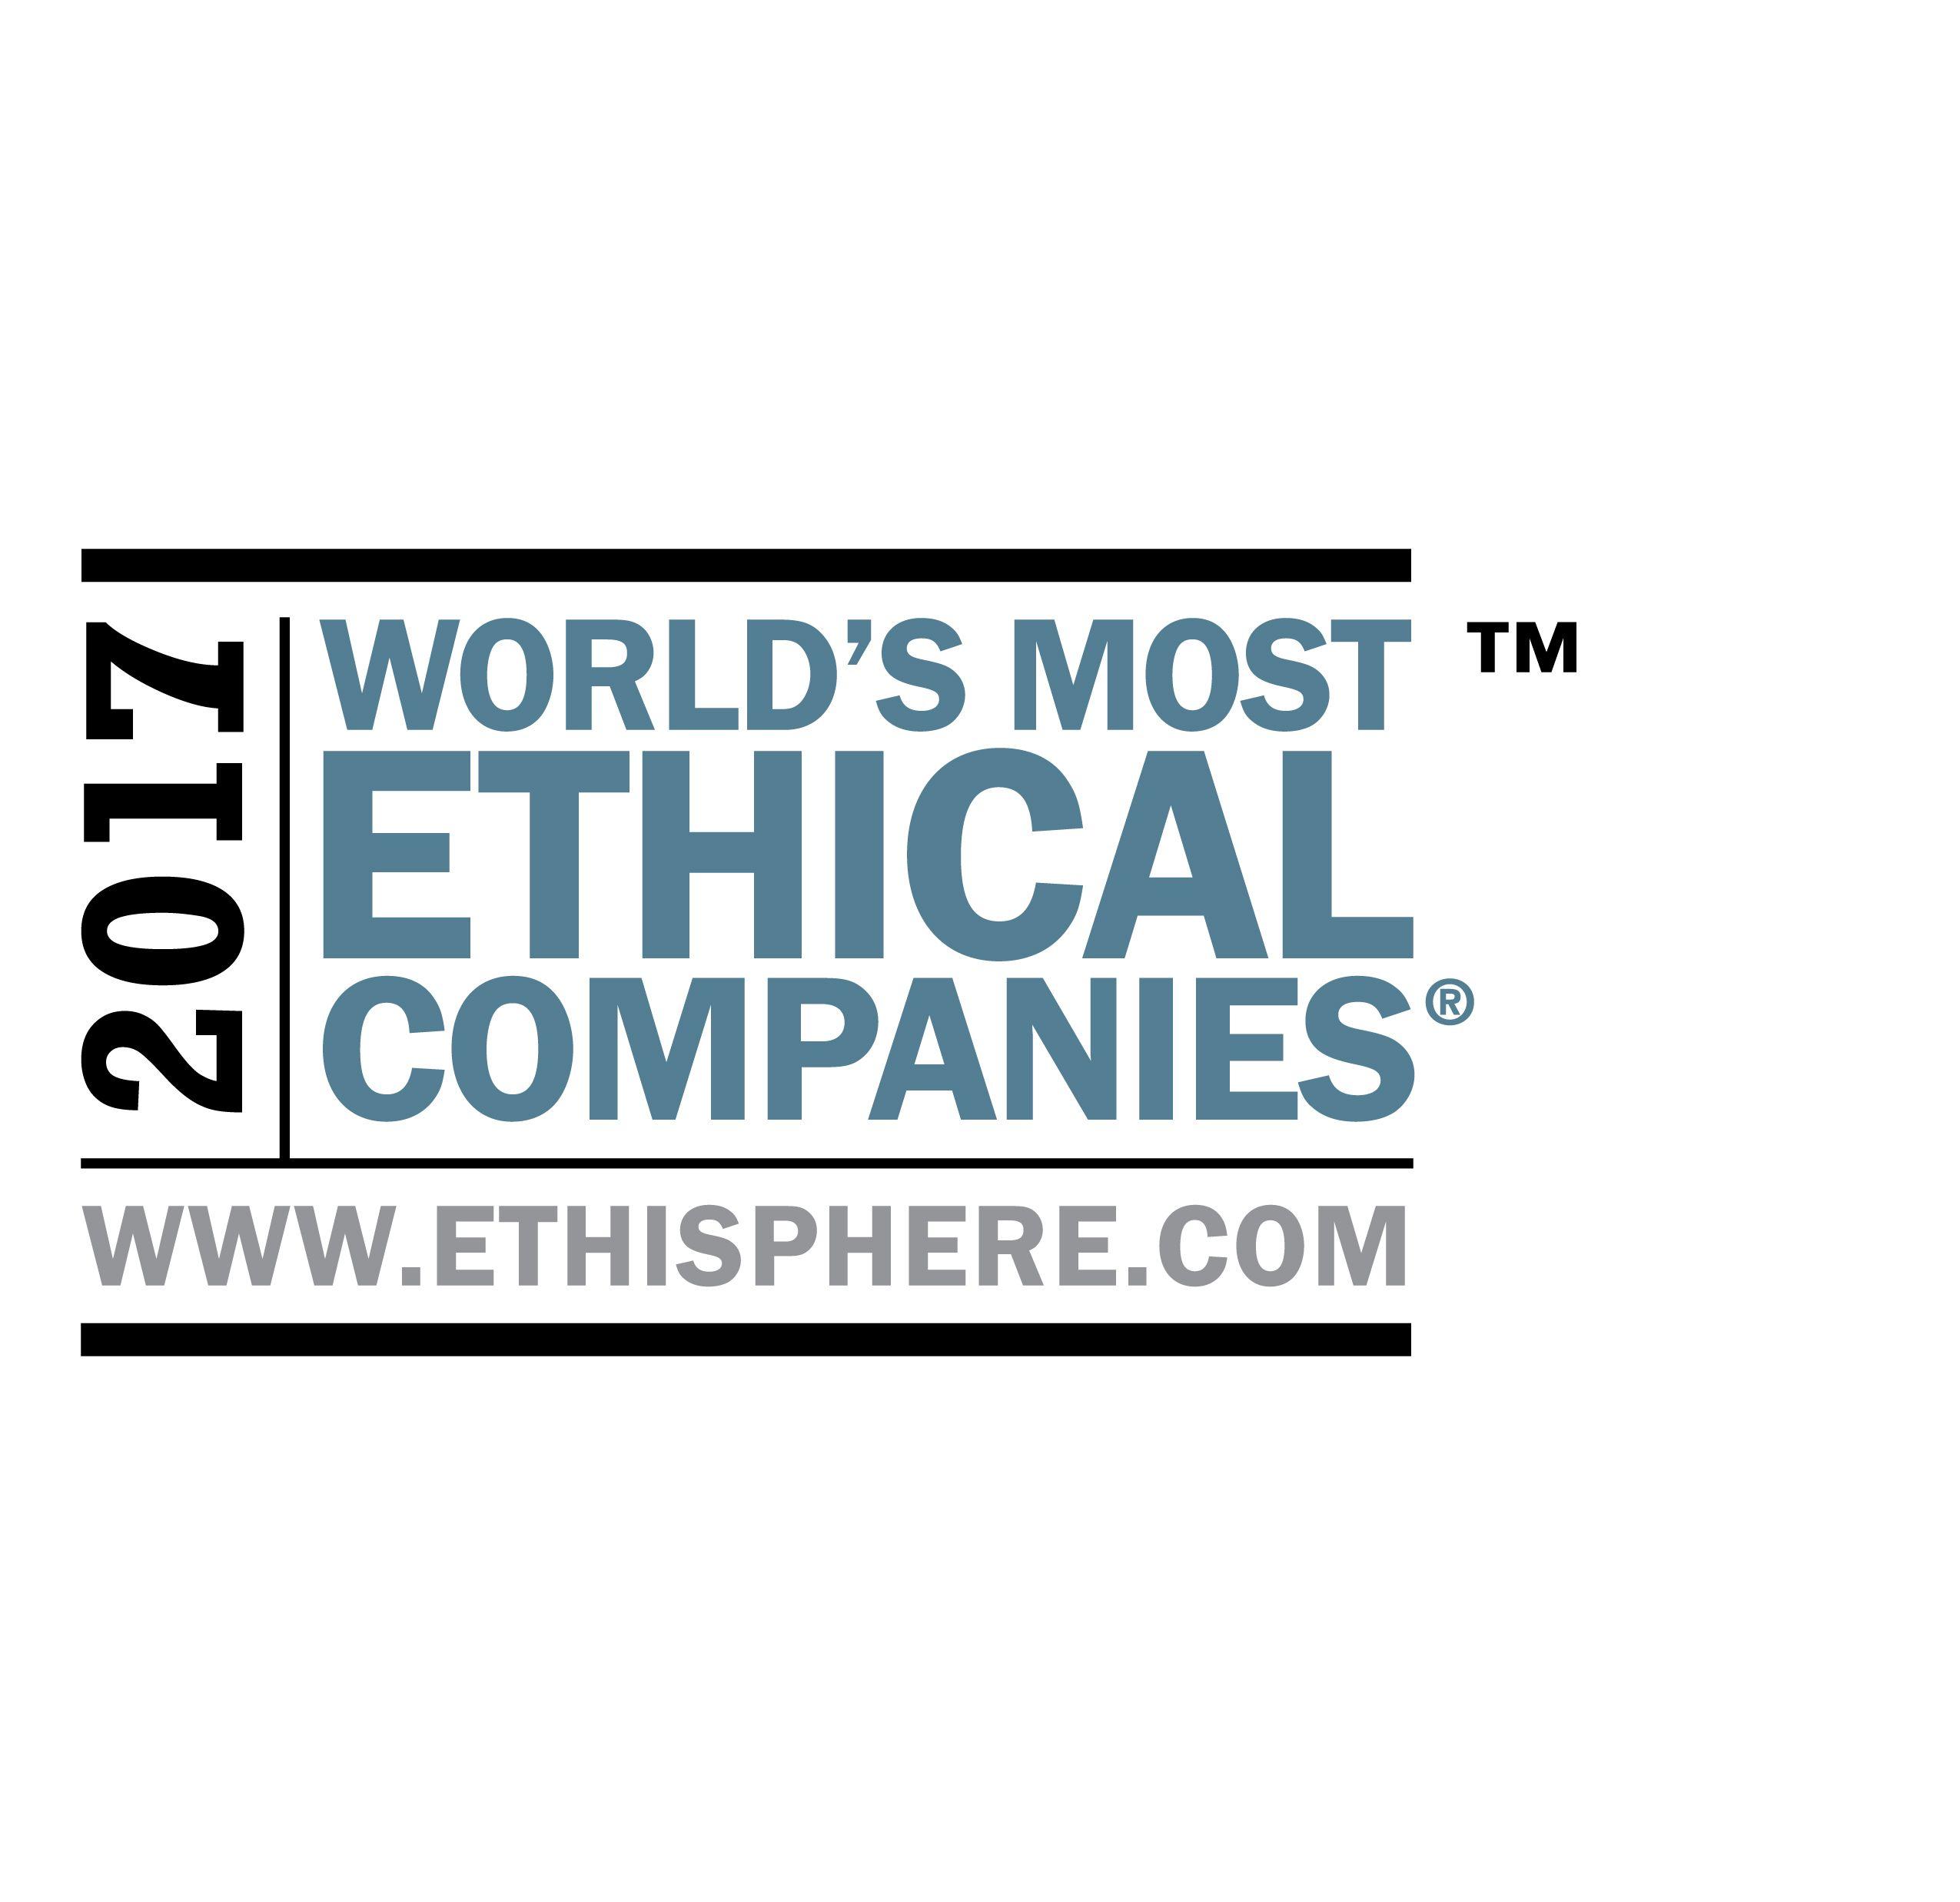 Ethisphere Award Logo - World's Most Ethical Companies by the Ethisphere Institute 2010